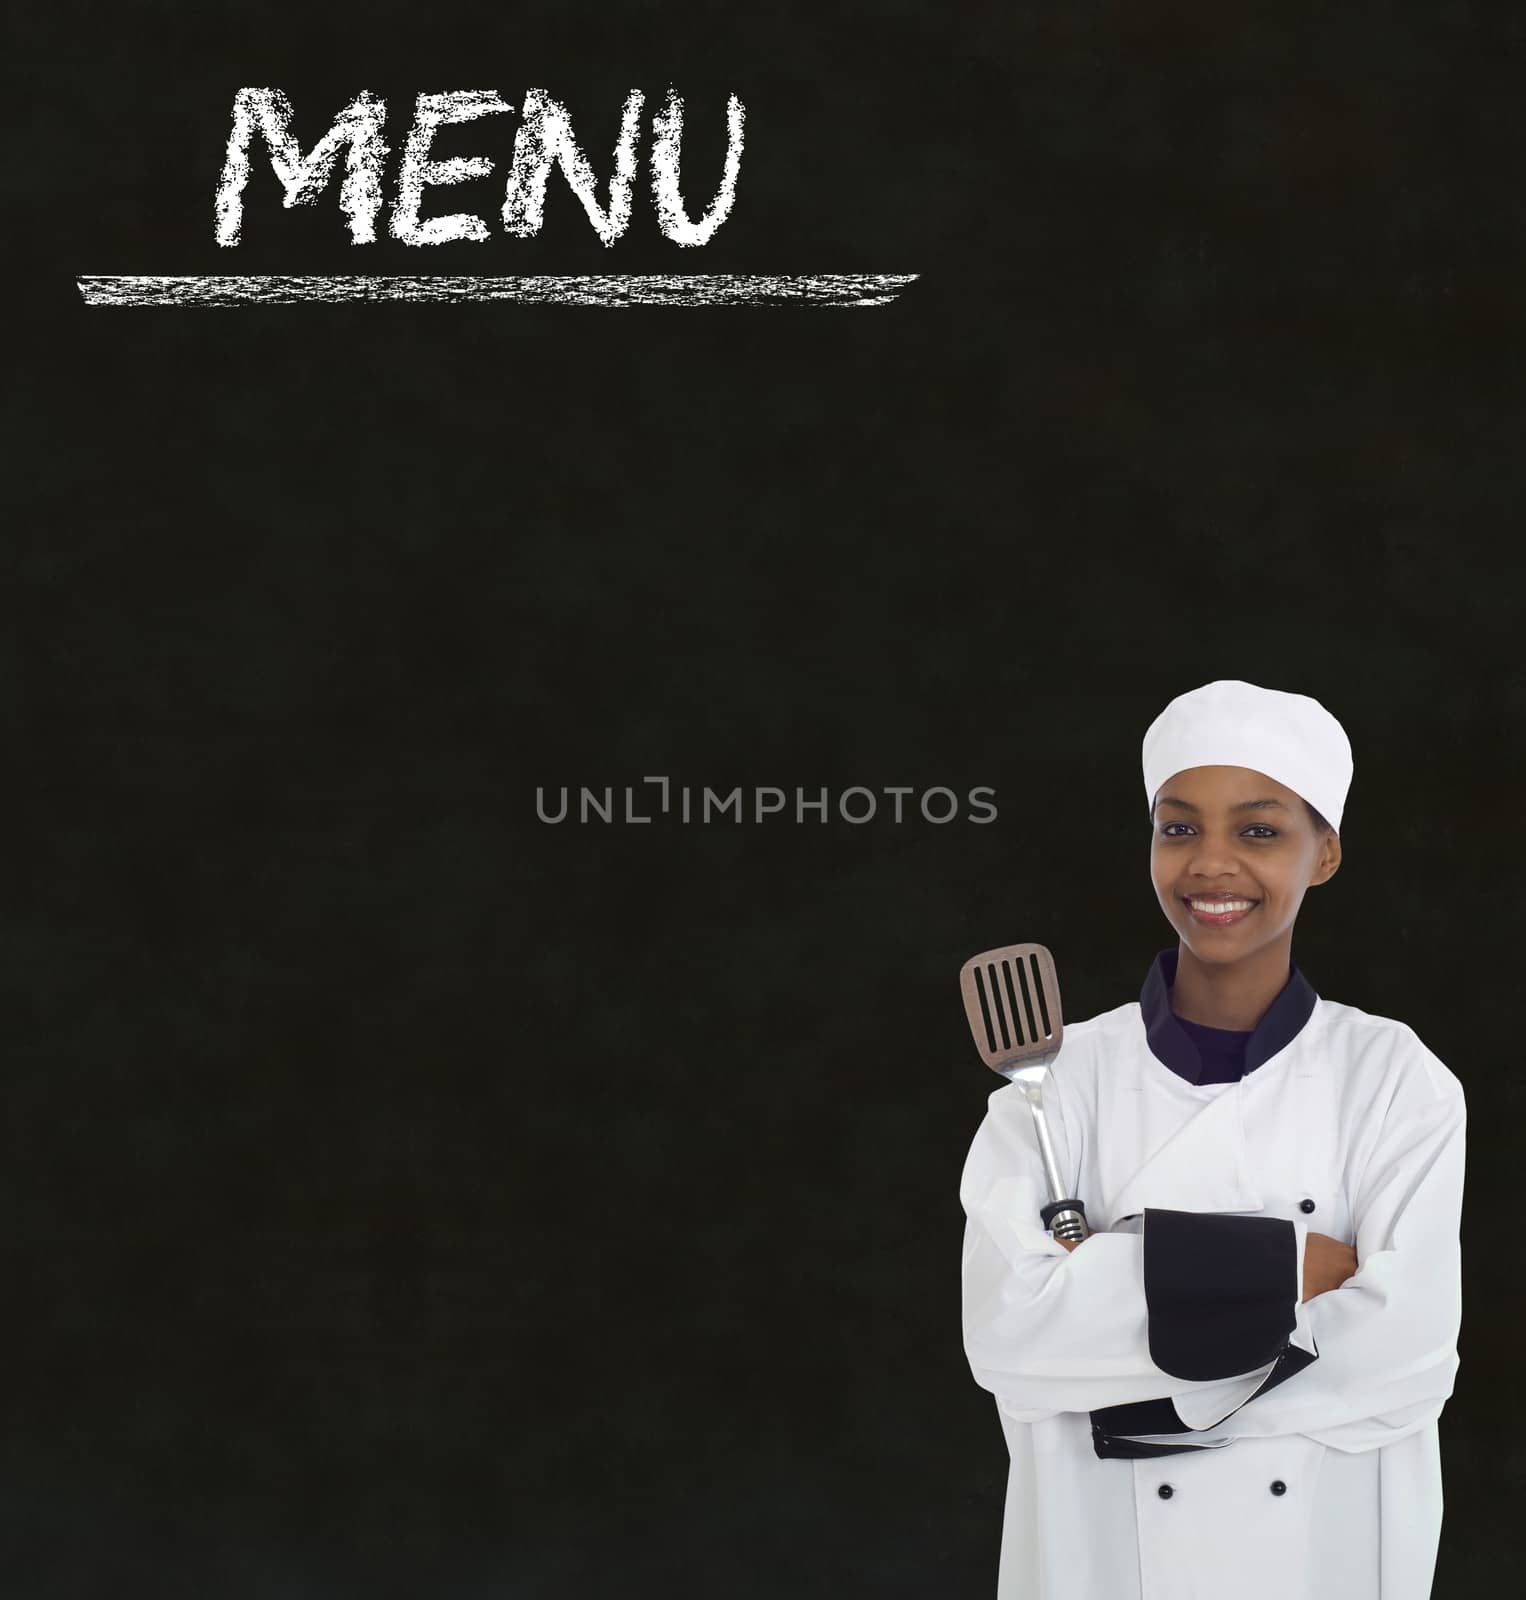 Chef with chalk menu sign on a blackboard background by alistaircotton